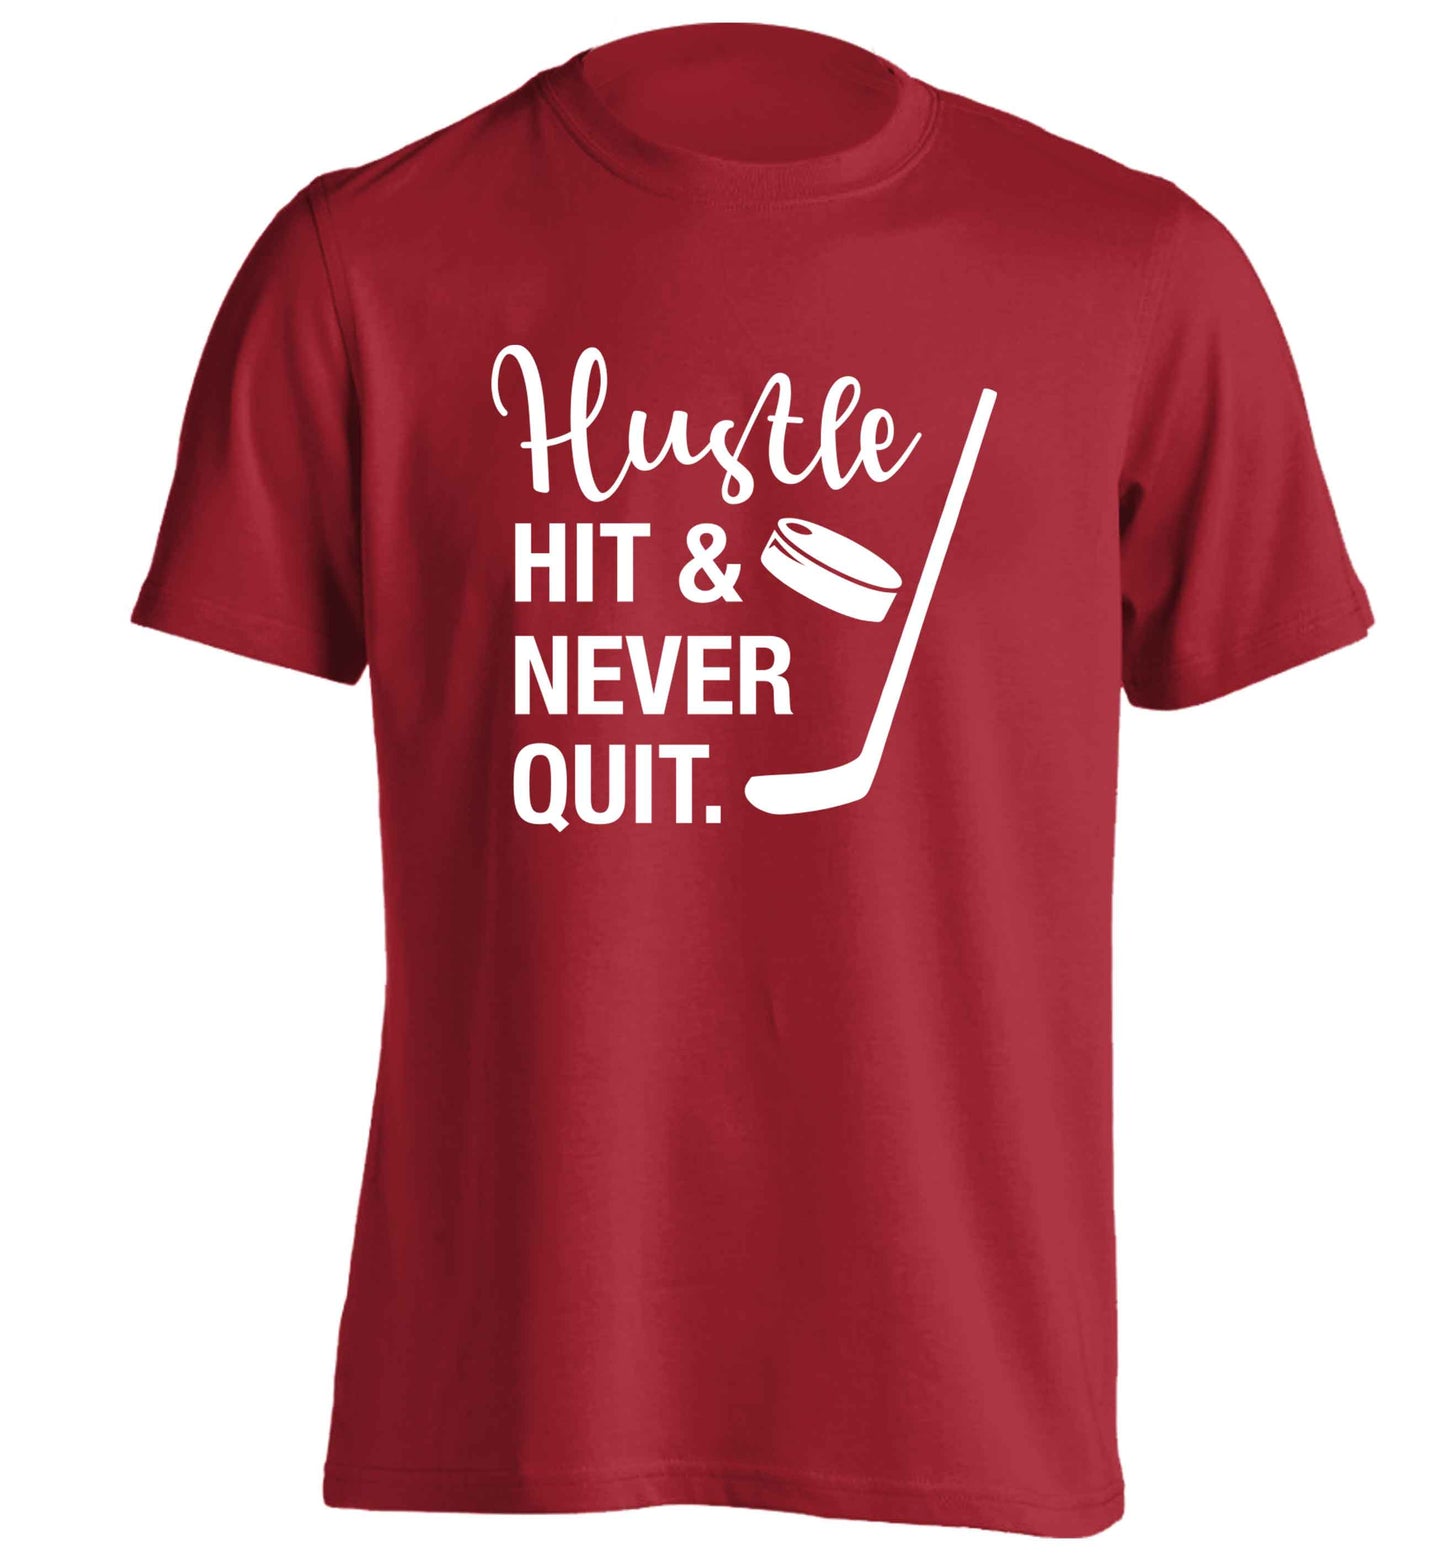 Hustle hit and never quit adults unisex red Tshirt 2XL